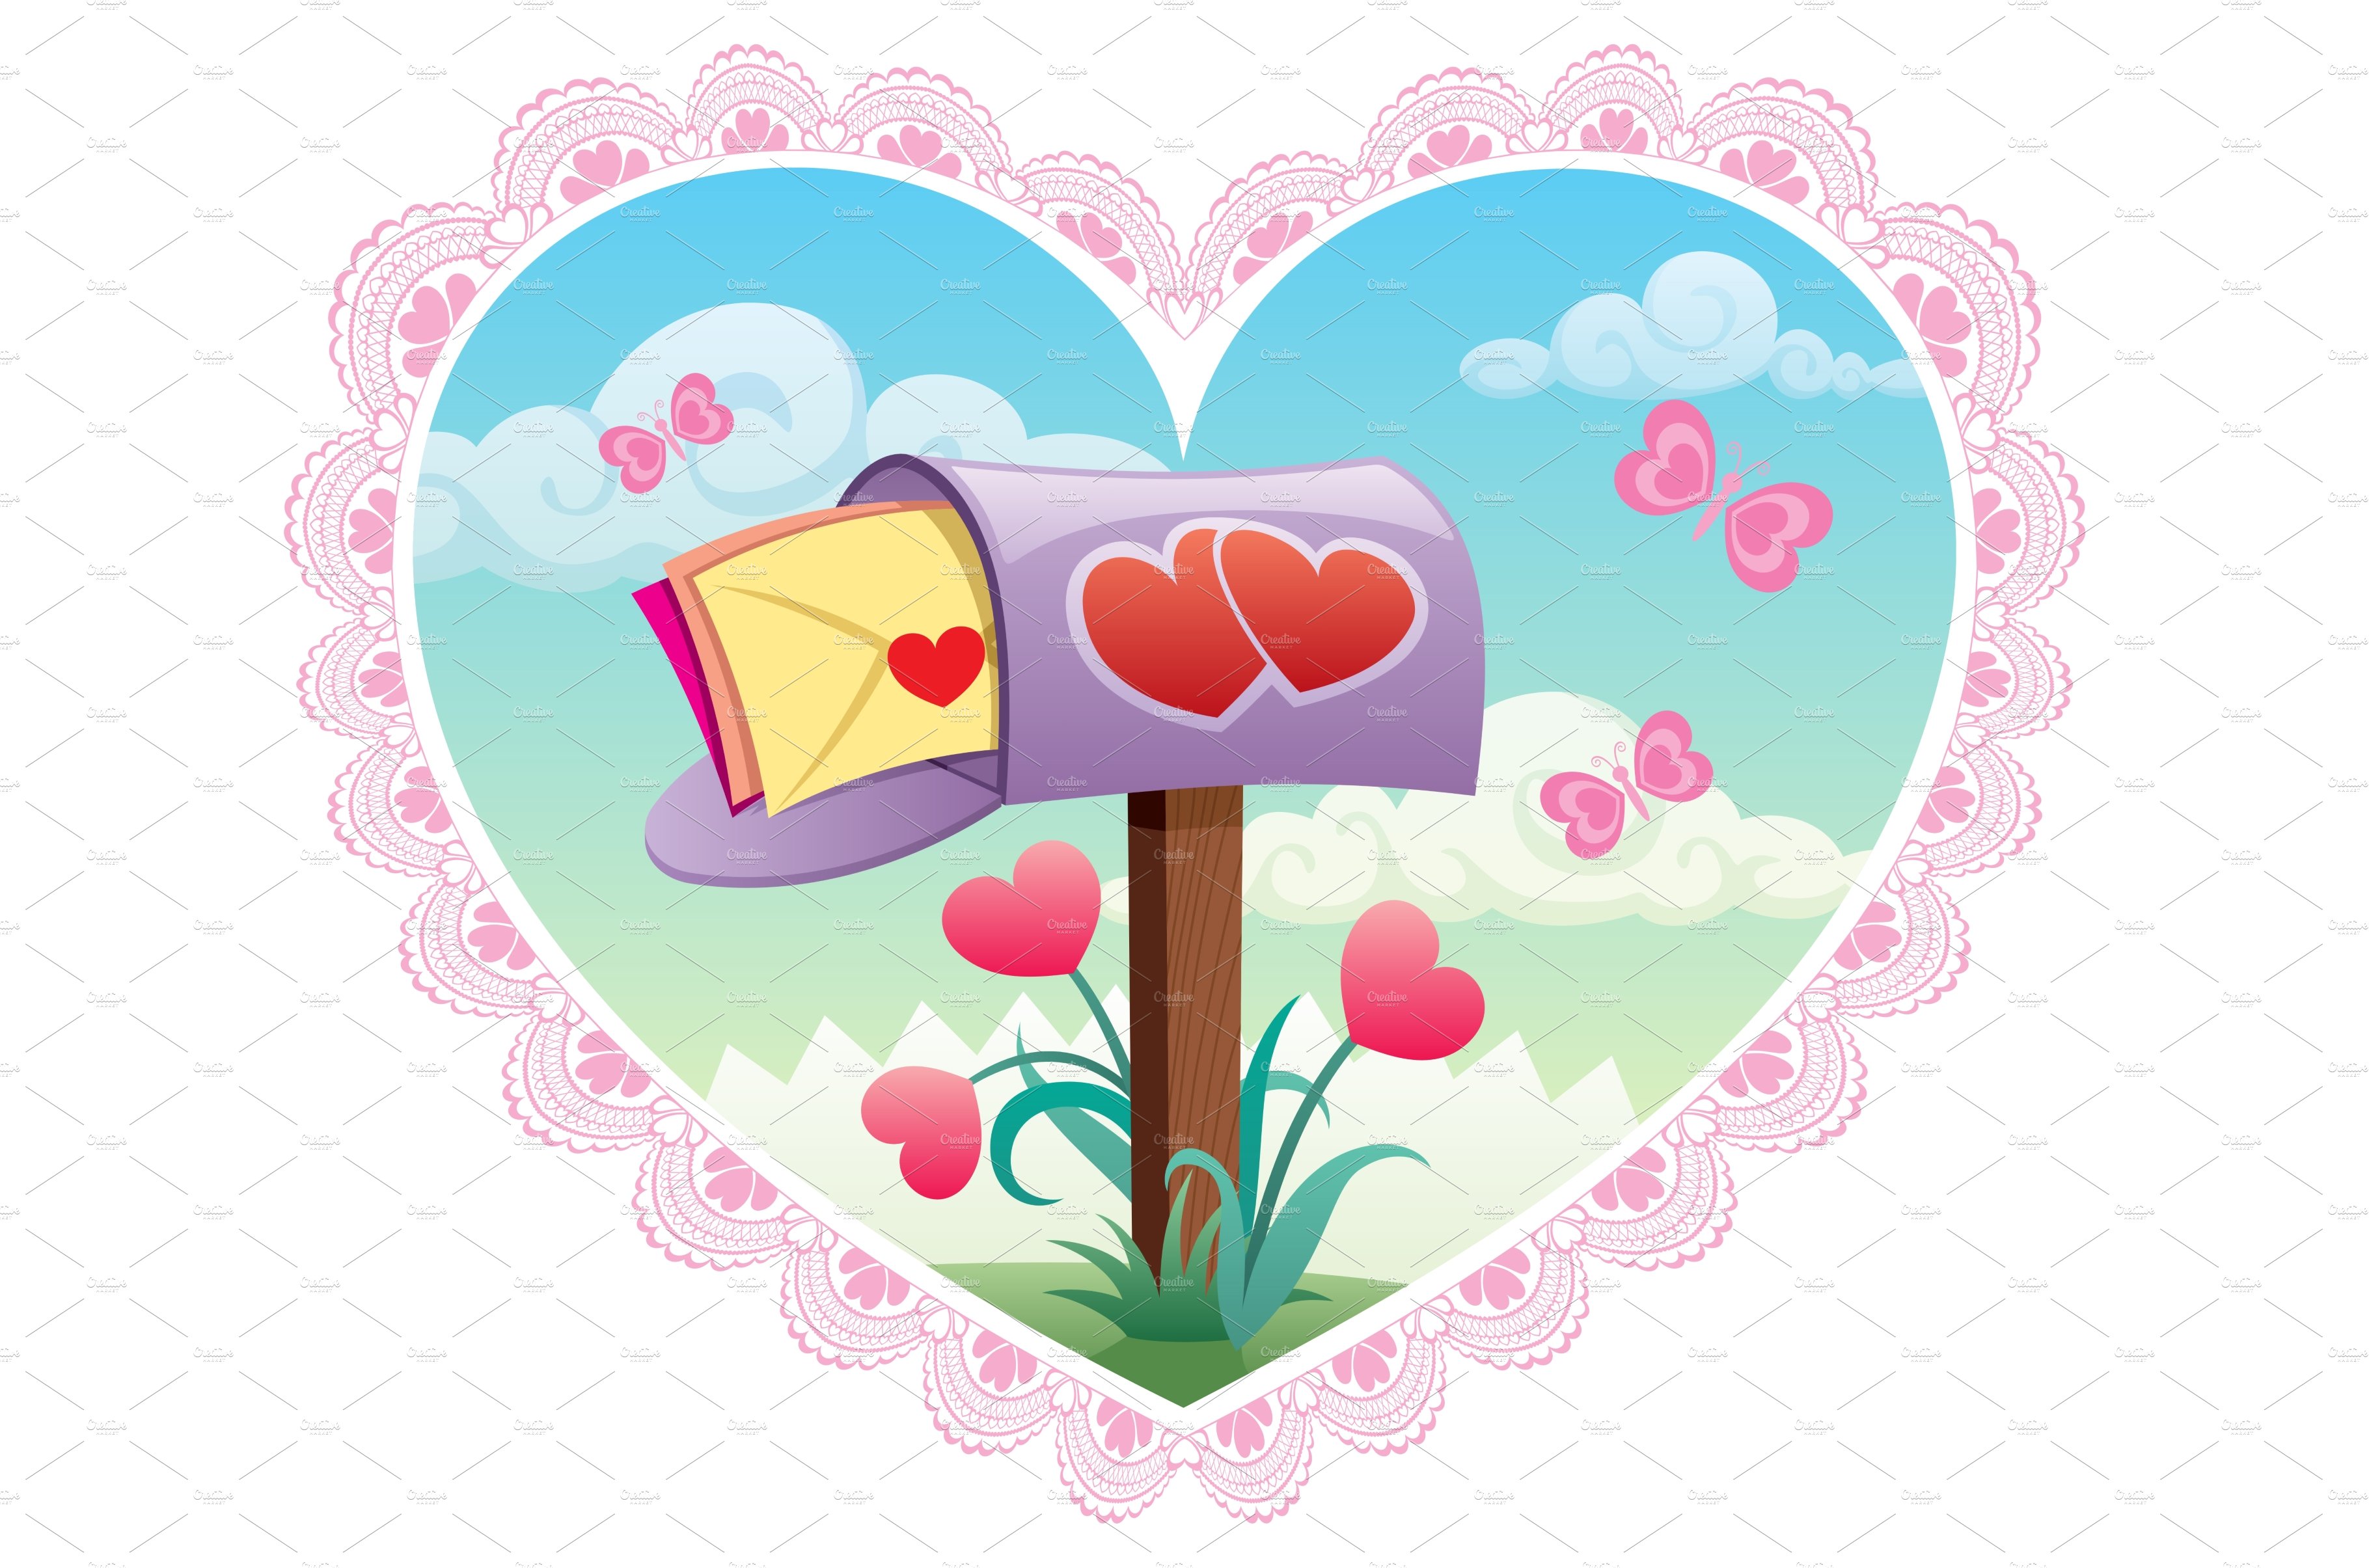 Love Mail cover image.